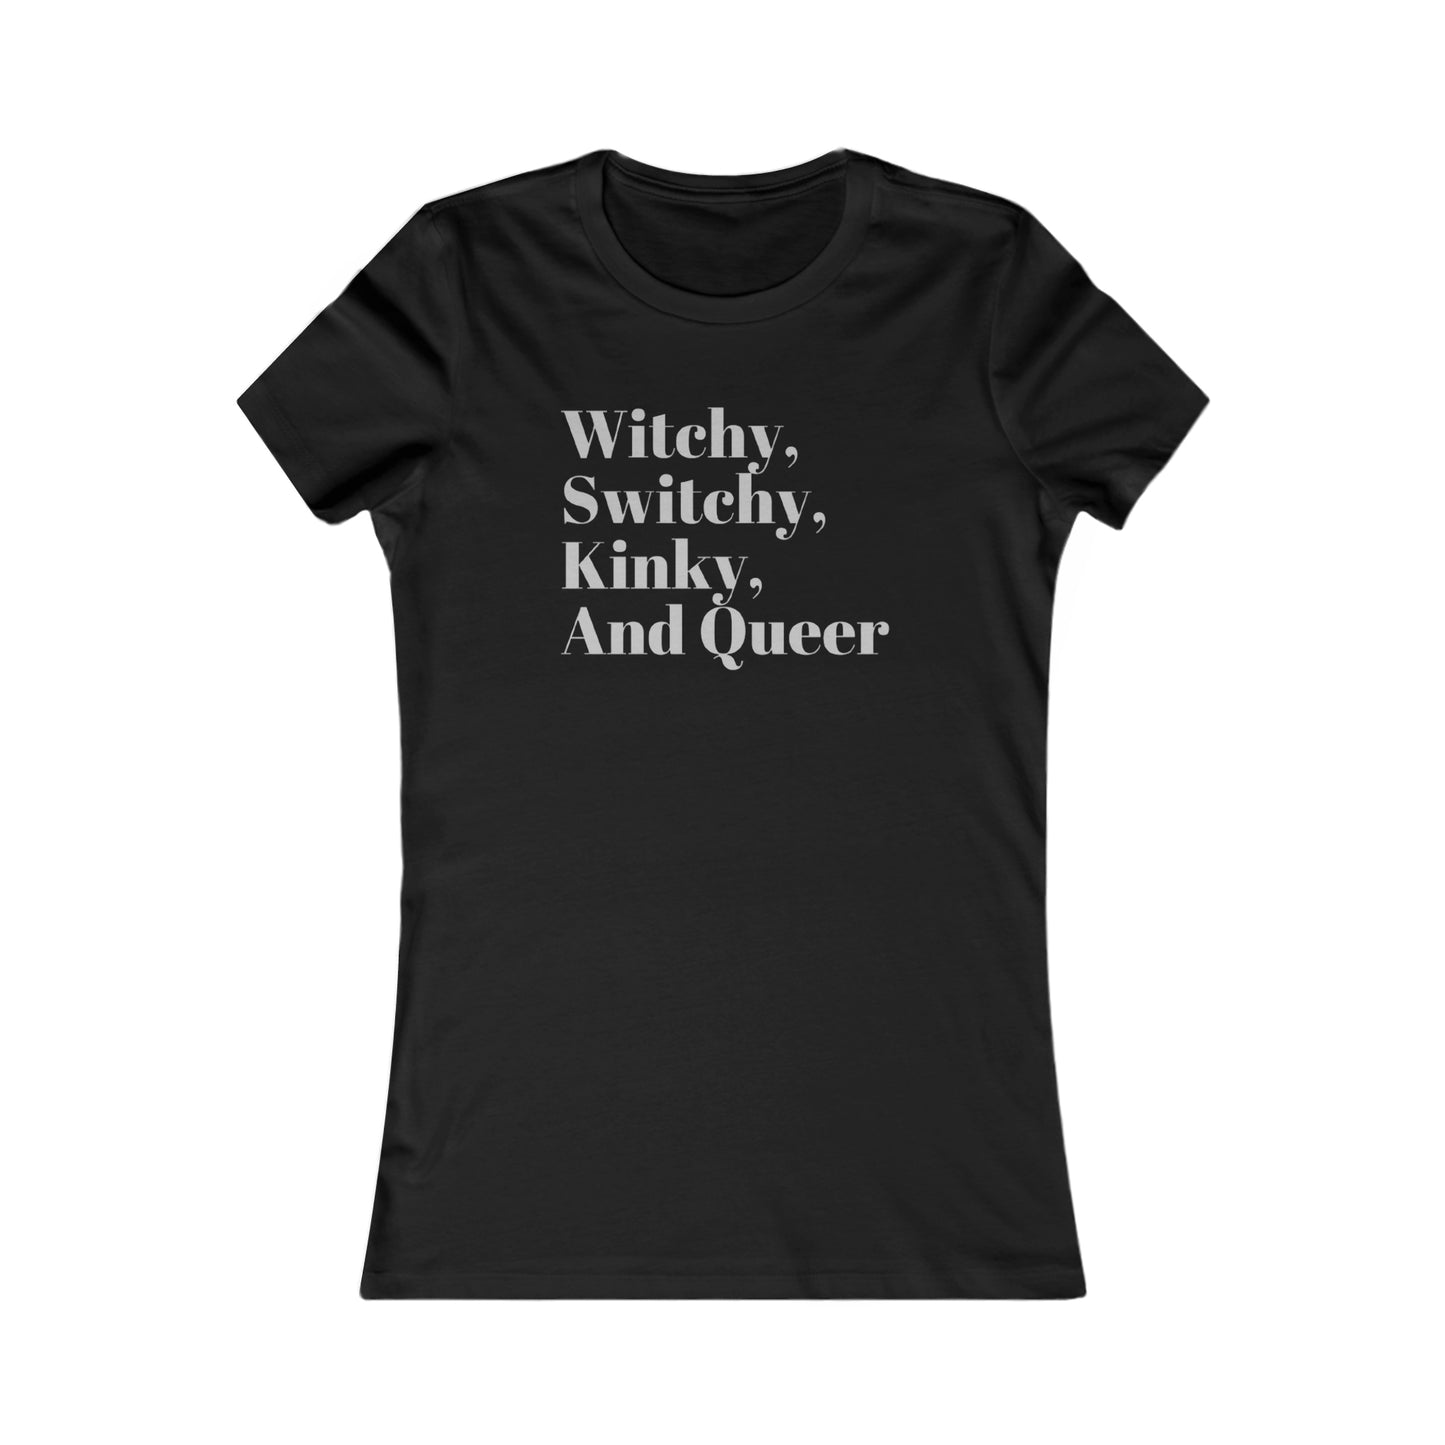 Witchy, Switchy, Kinky, and Queer Favorite Tee